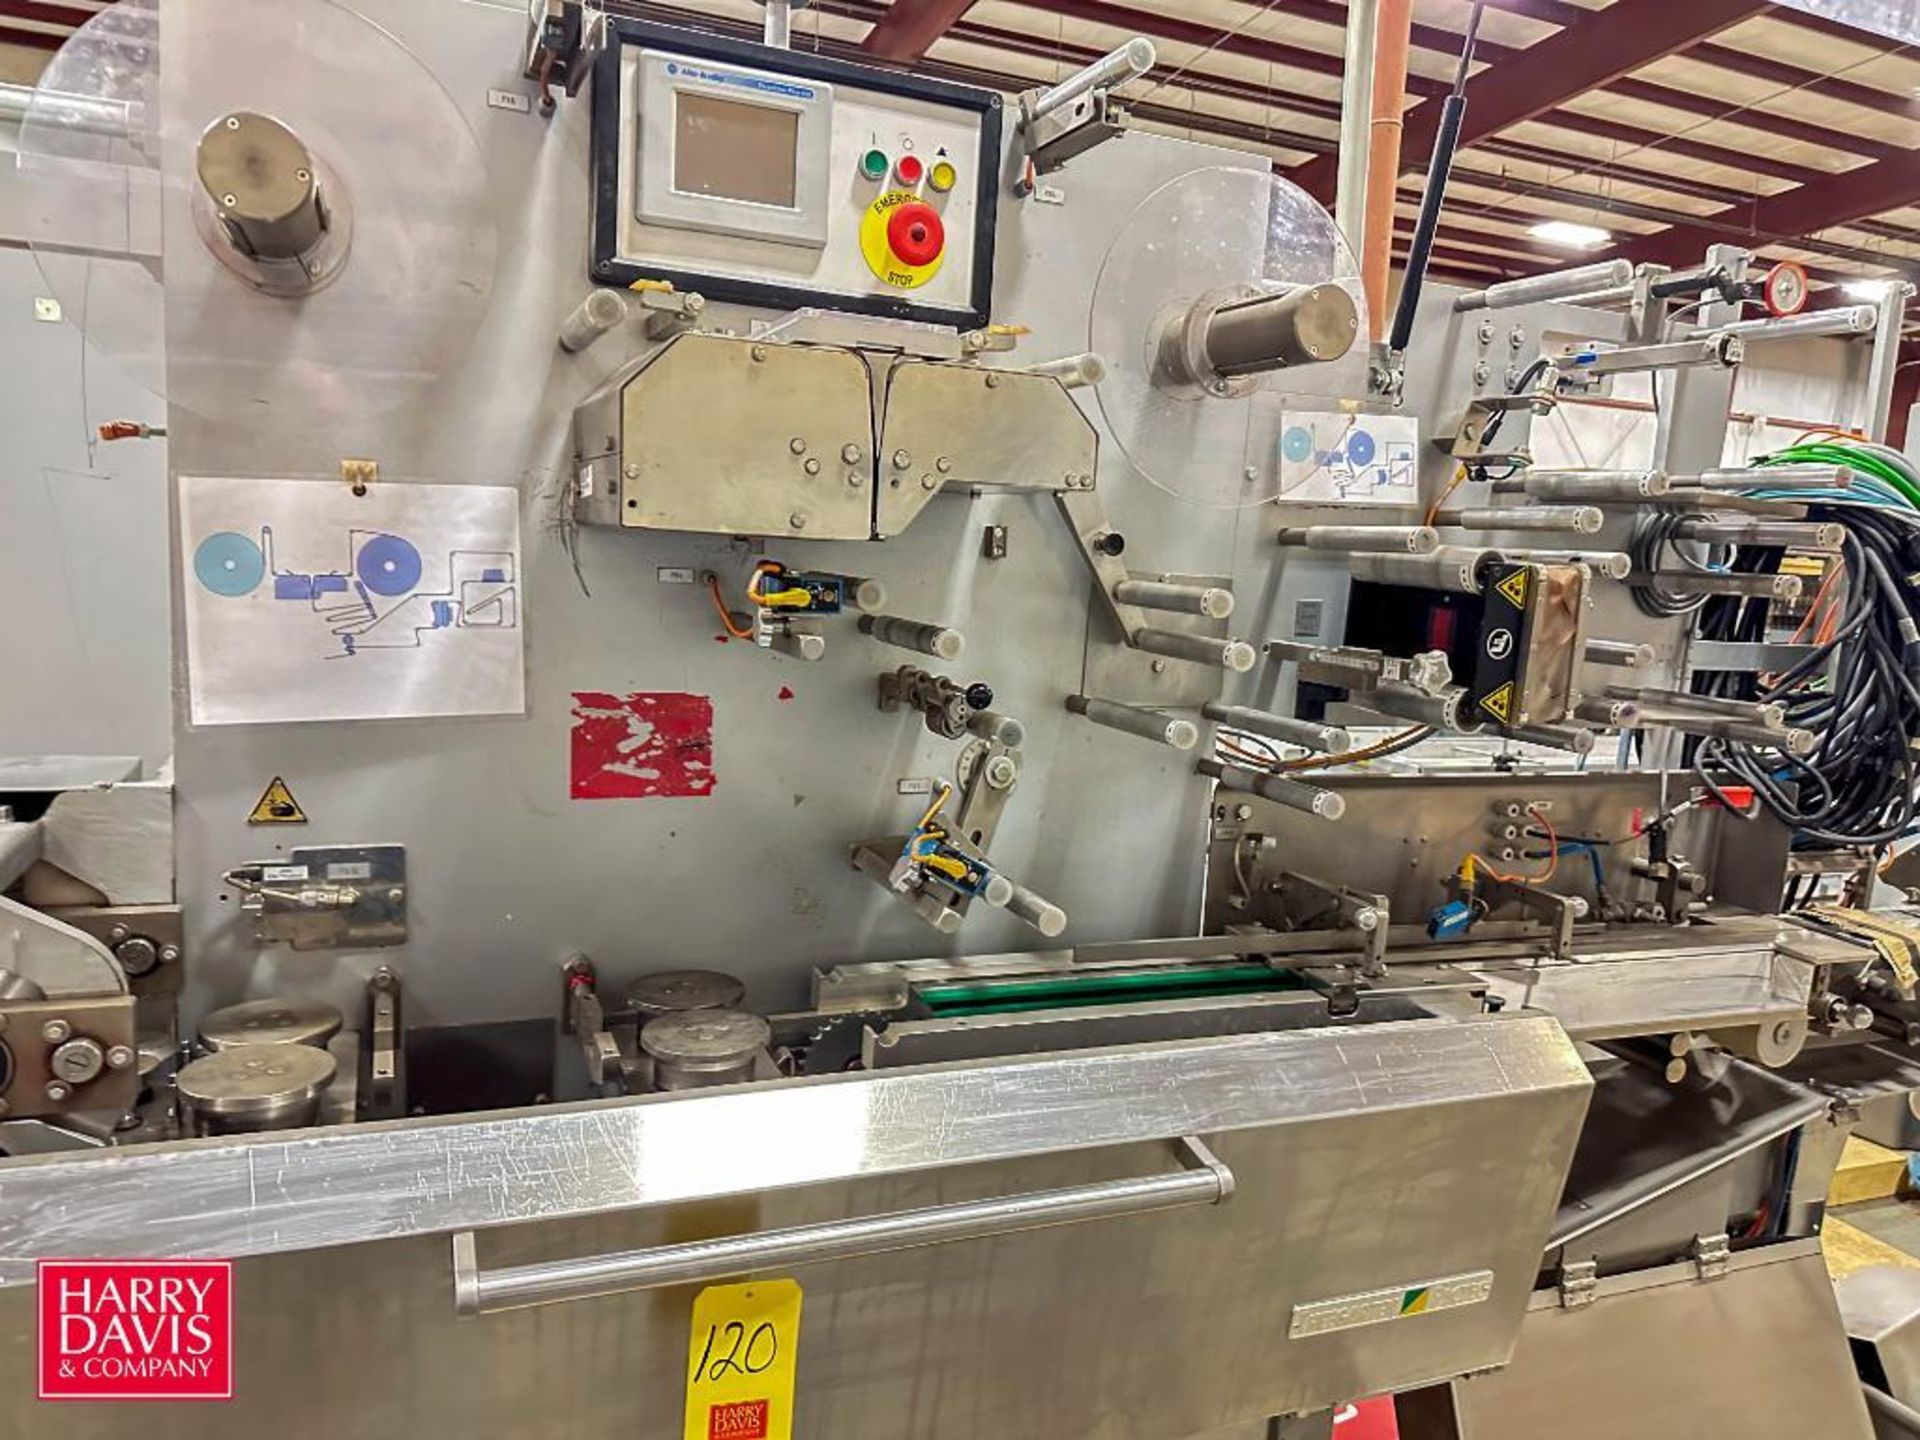 THEEGARTEN PACTEC Wrapper, Model: FPC5, S/N: FPC5006 with Vacuum Blower and Allen-Bradley PanelView - Image 2 of 5